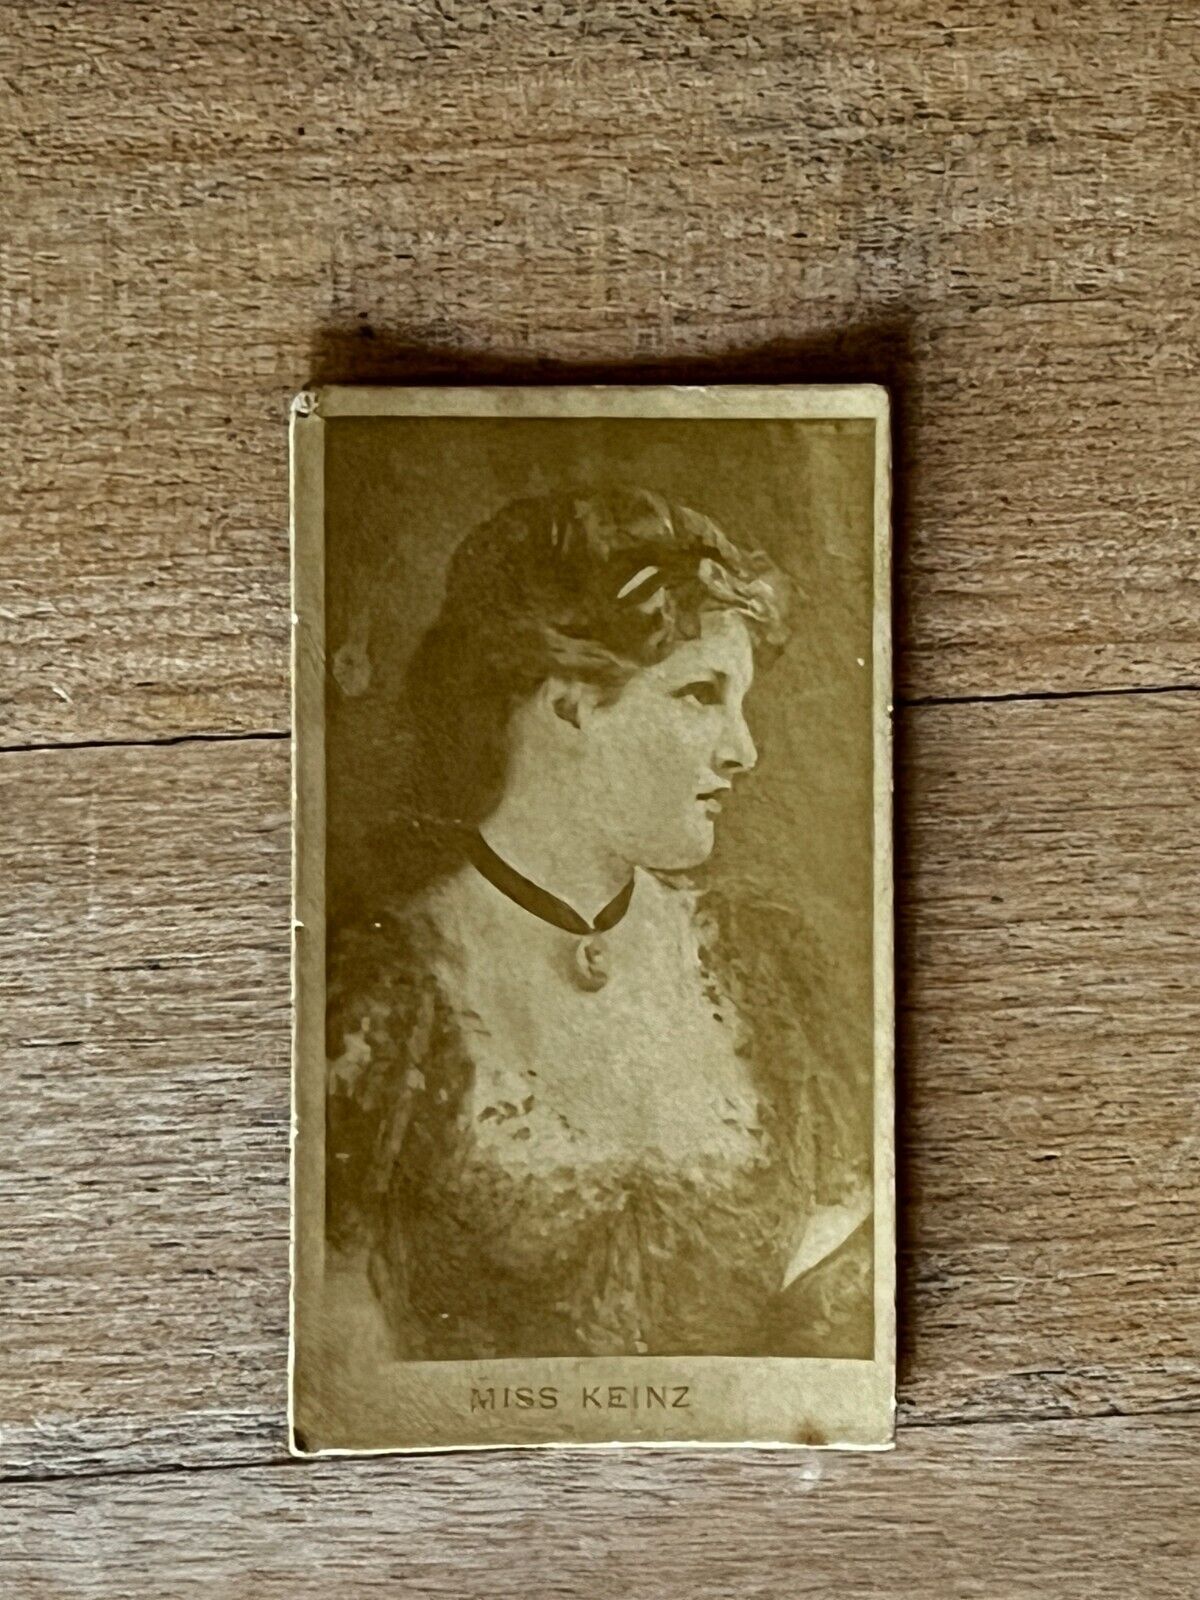 1890 SWEET CAPORAL CIGARETTE - N245 MISS KEINZ - Actress Tobacco Card